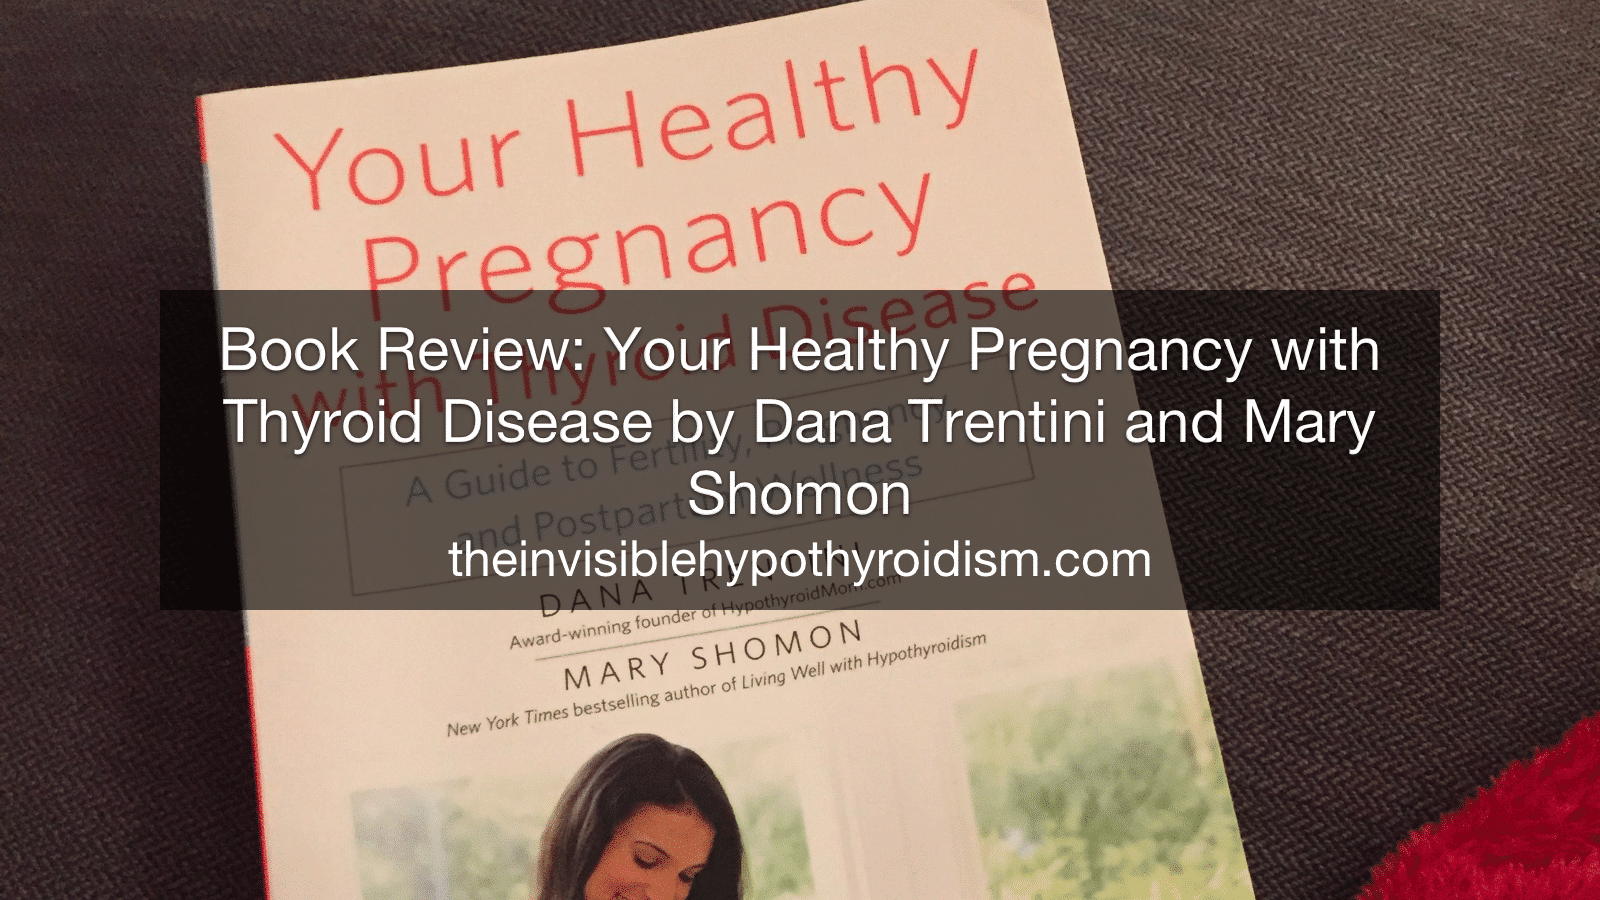 Book Review: Your Healthy Pregnancy with Thyroid Disease by Dana Trentini and Mary Shomon